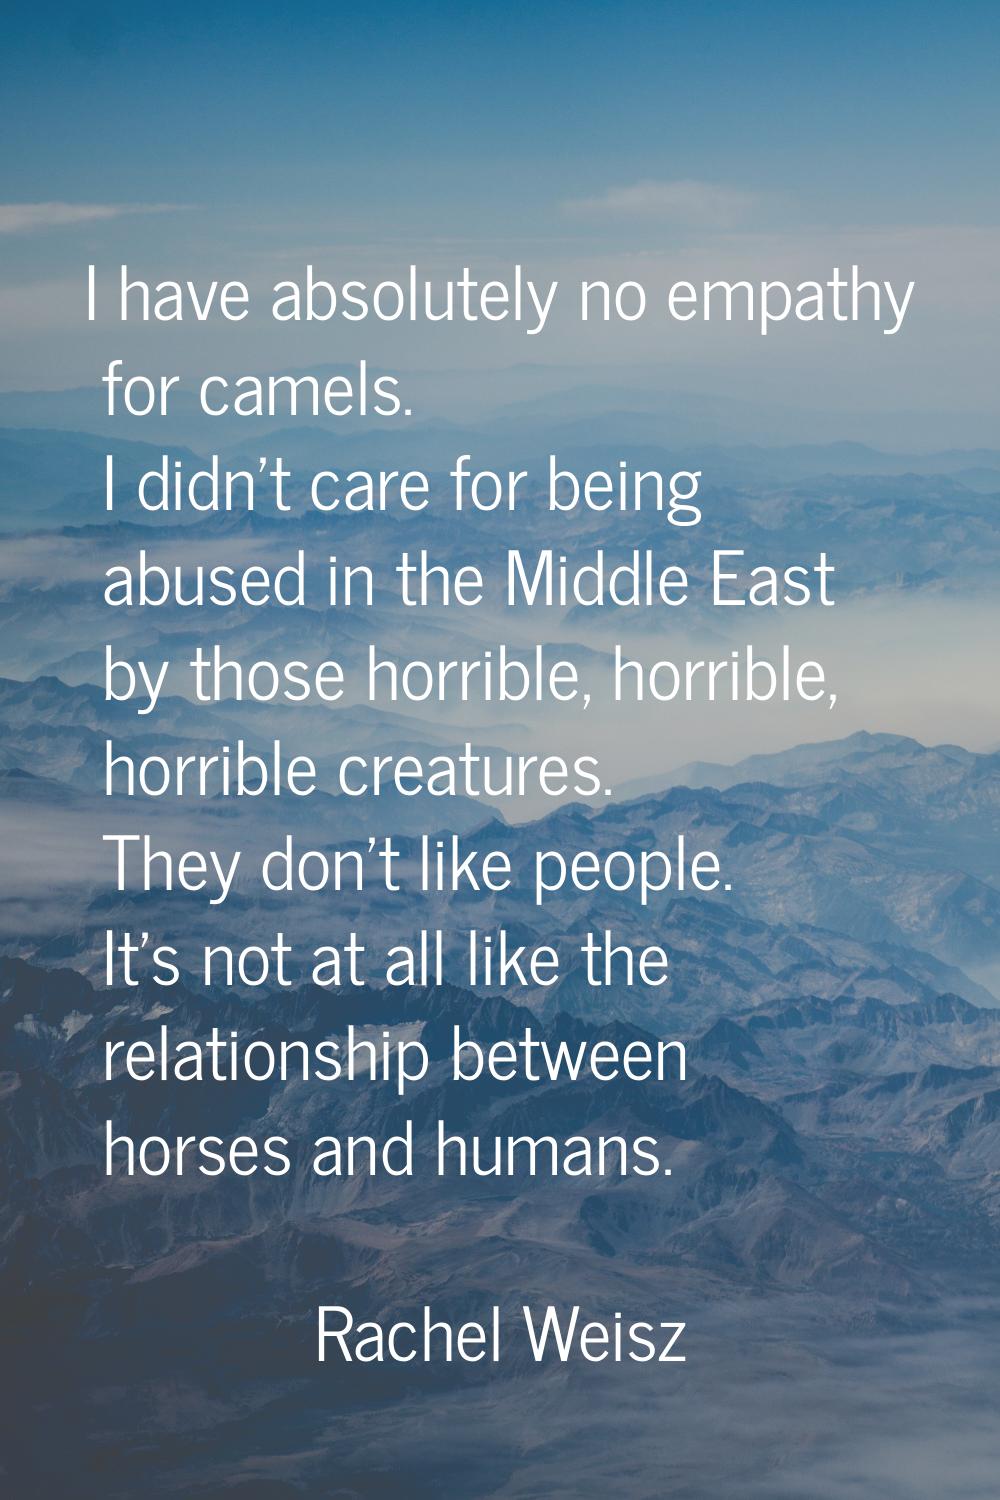 I have absolutely no empathy for camels. I didn't care for being abused in the Middle East by those